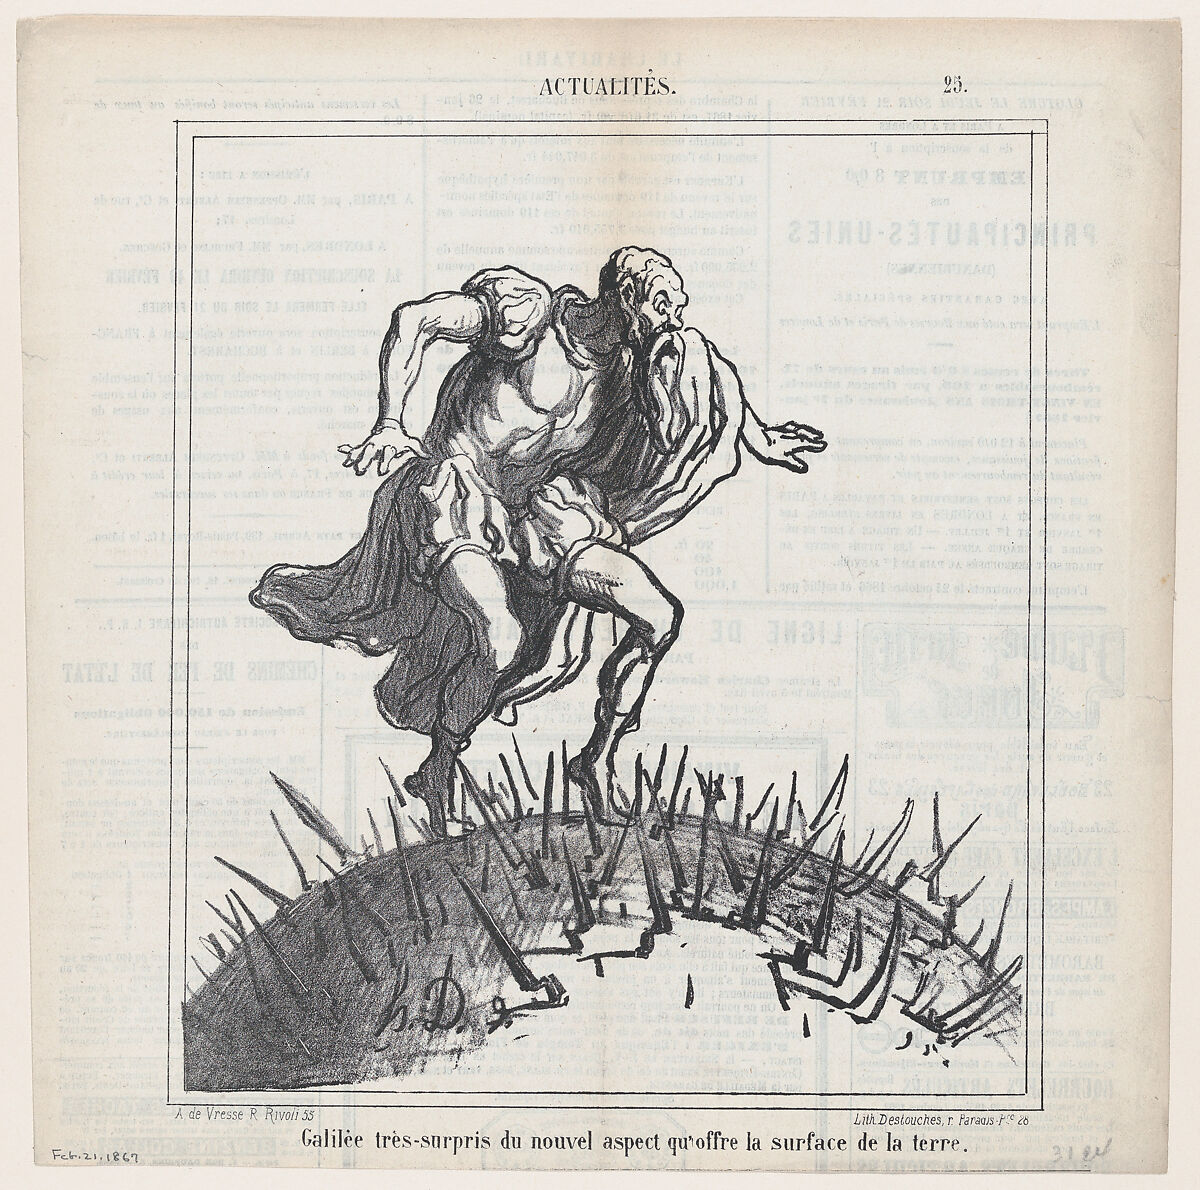 Galileo, astonished by changes in the face of the earth, from 'News of the day,' published in Le Charivari, February 21, 1867, Honoré Daumier (French, Marseilles 1808–1879 Valmondois), Lithograph on newsprint; second state of two (Delteil) 